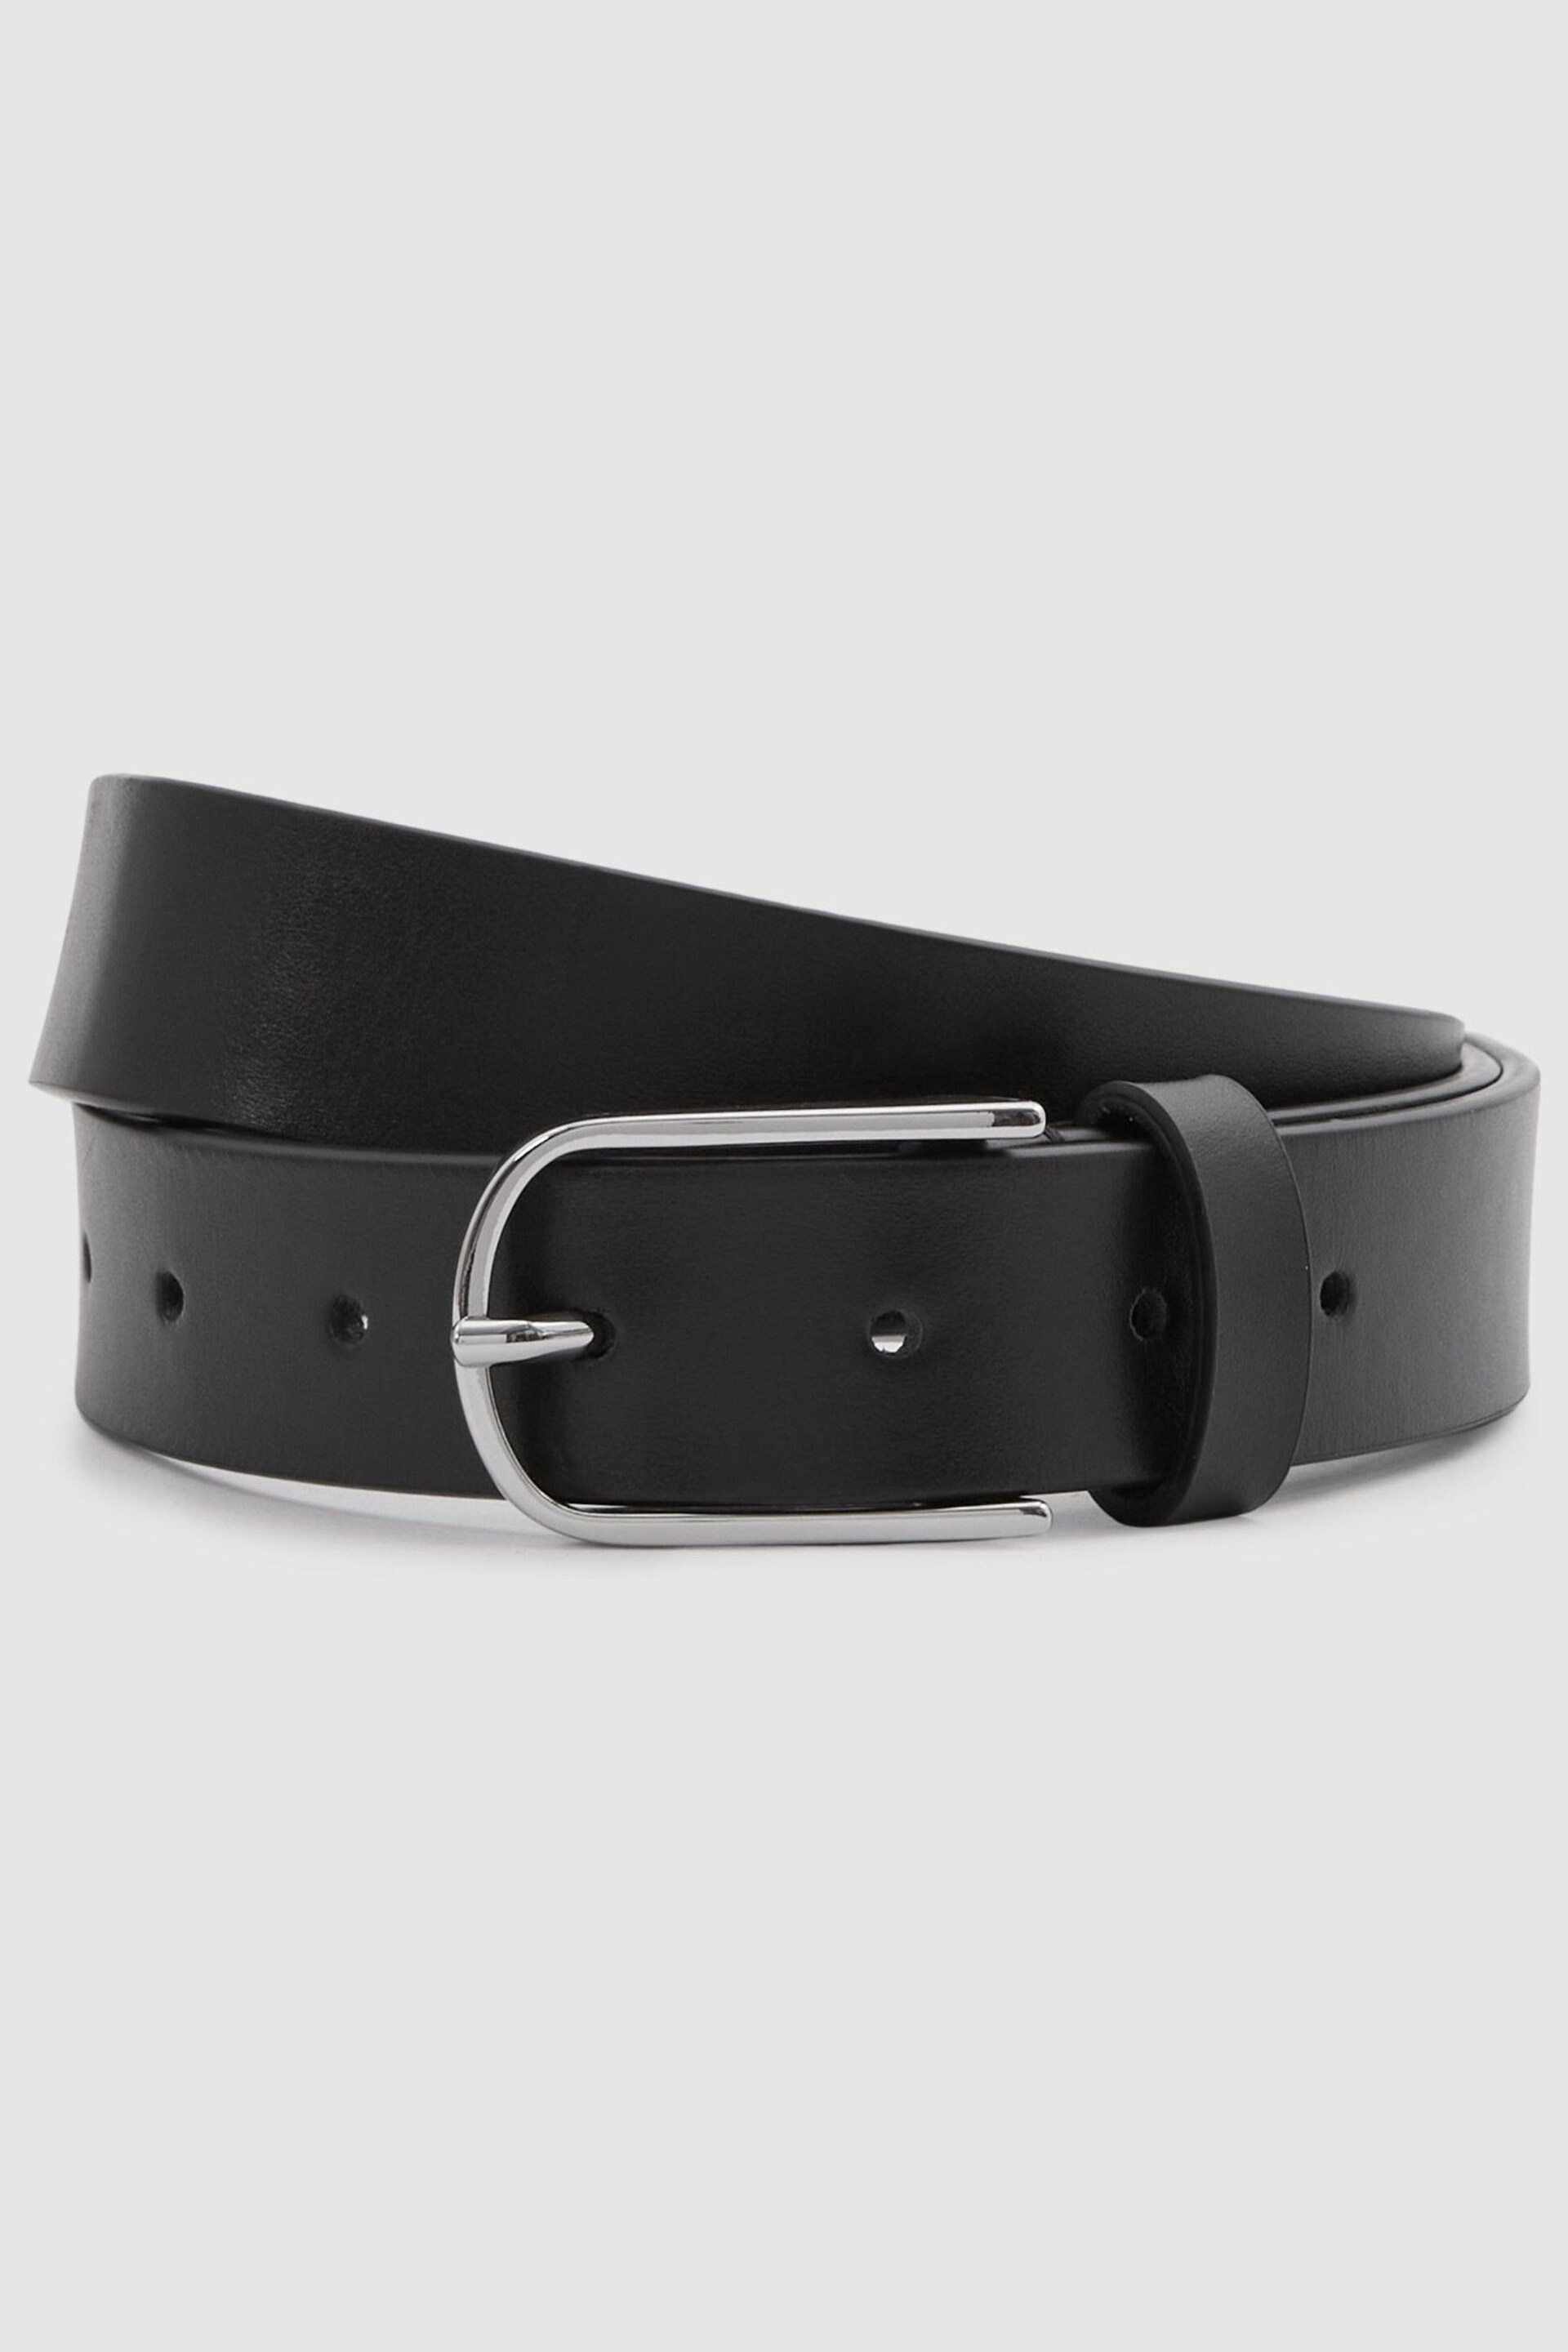 Reiss Black Carrie Leather Belt - Image 1 of 4